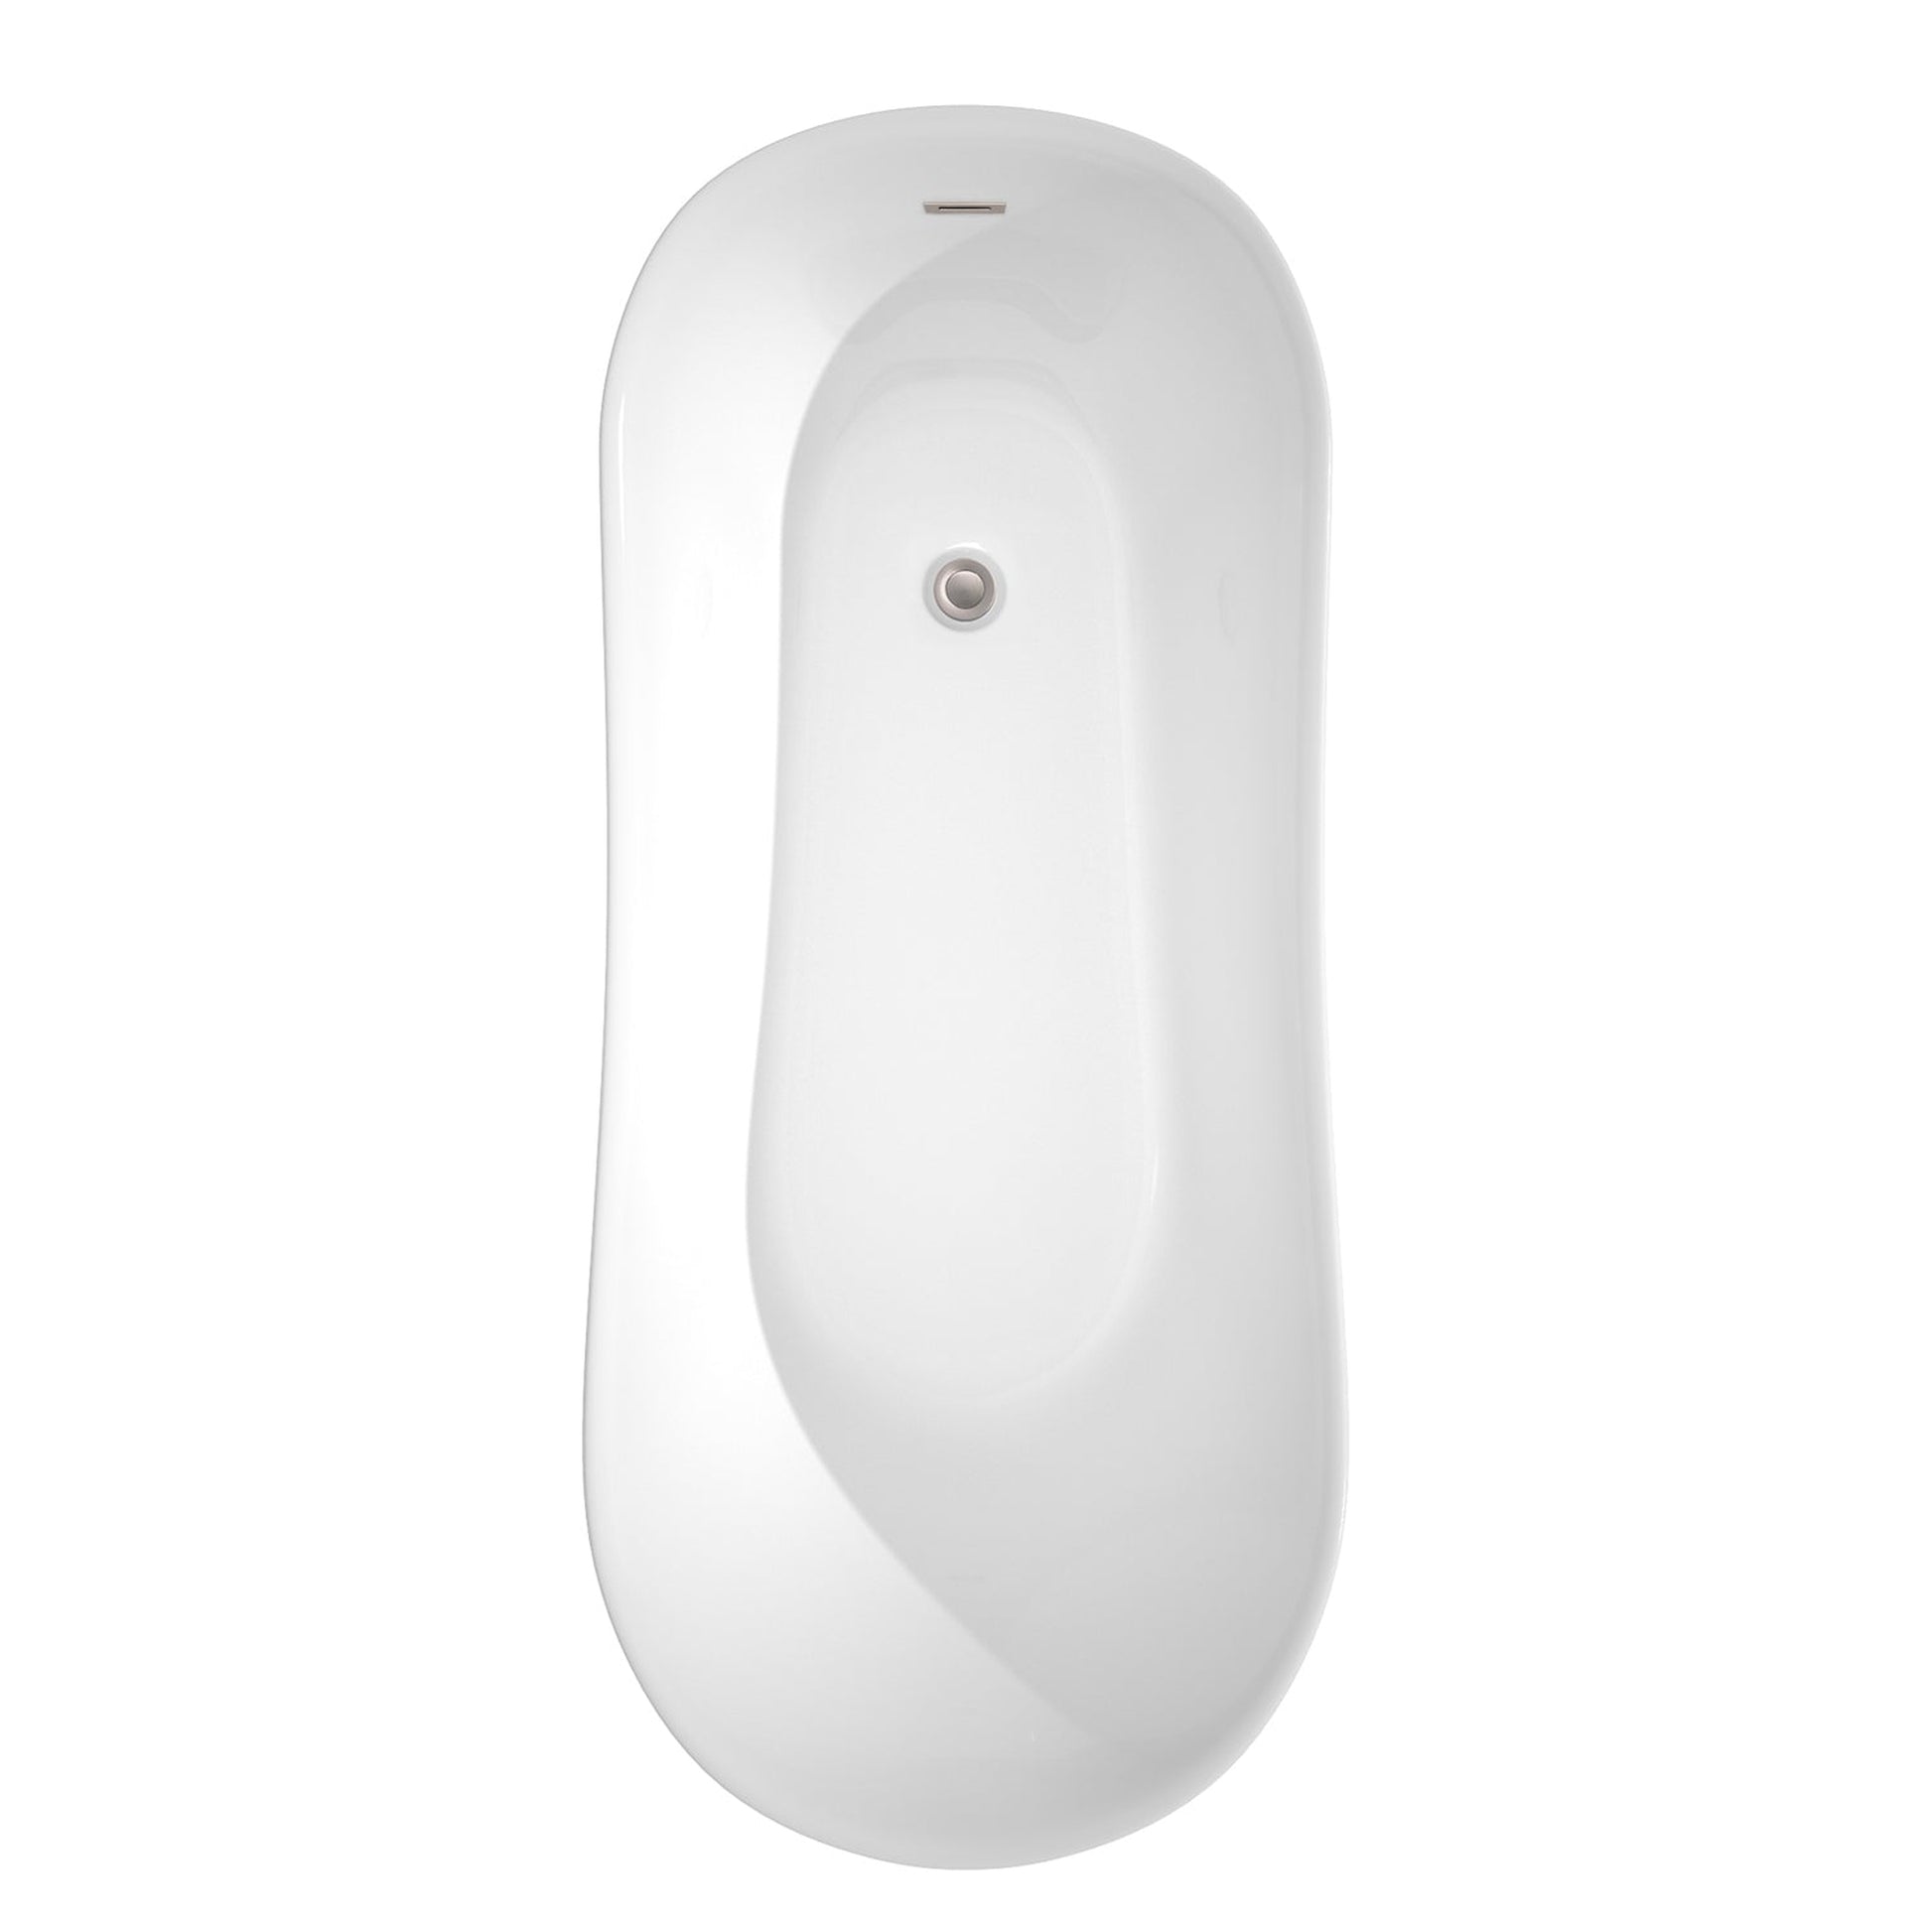 Wyndham Collection Janice 67" Freestanding Bathtub in White With Brushed Nickel Drain and Overflow Trim